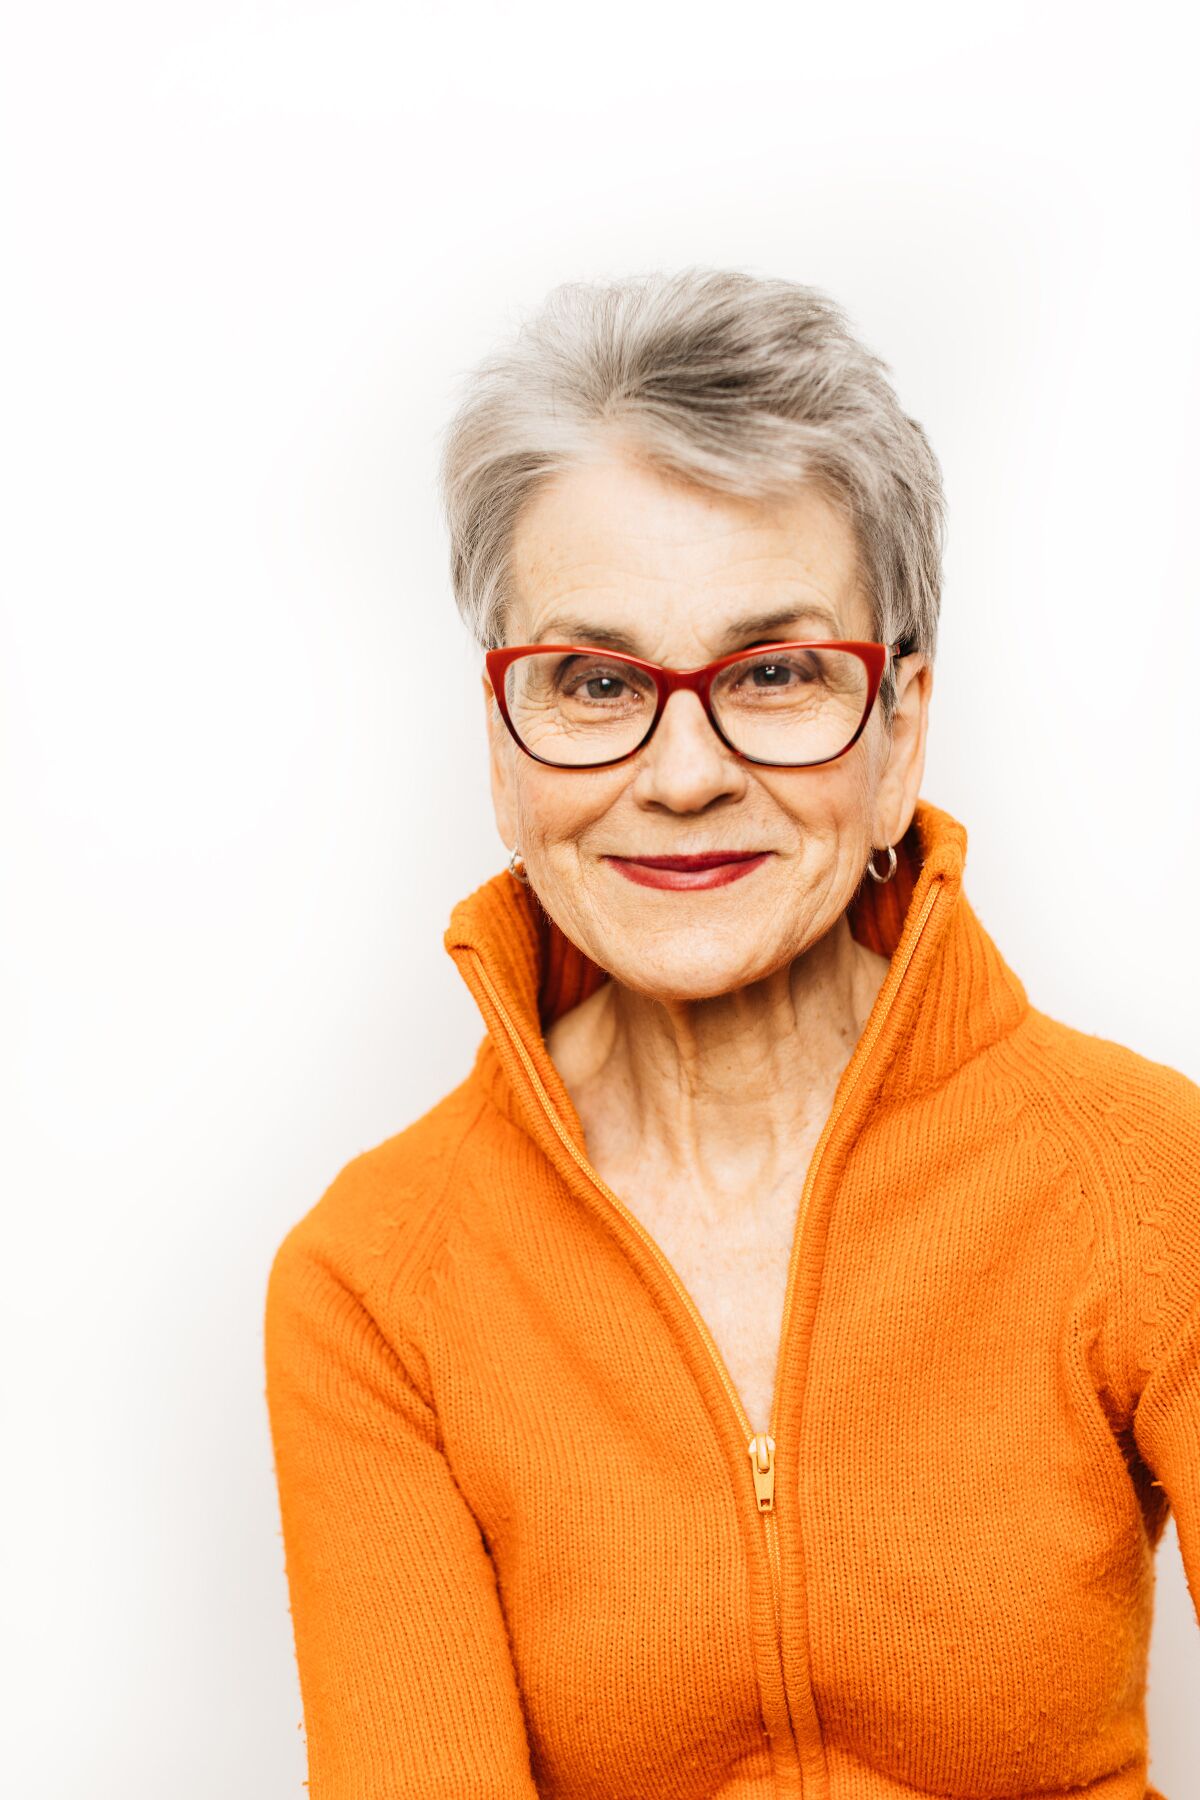 Author Frances Moore Lappé wears an orange zip-up sweater and red glasses, smiling at the camera.